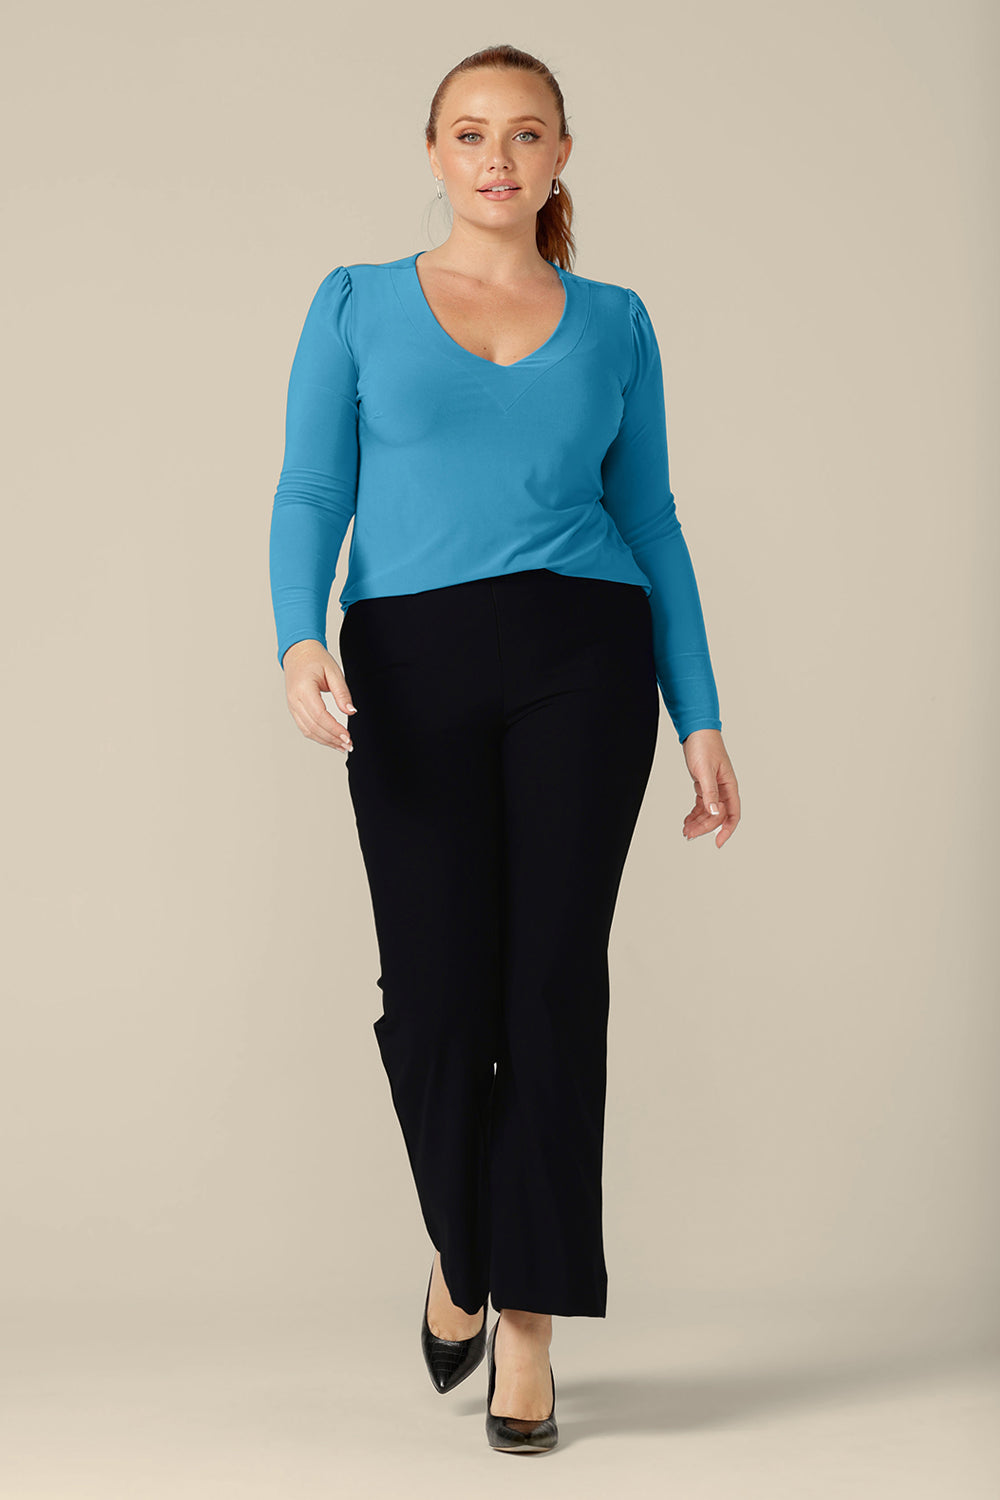 A vsize 12, curvy woman wears a long sleeve, V-neck top in Opal blue jersey with straight-leg navy work pants. Made in Australia by Australian and New Zealand women's clothing company, L&F, shop tops in inclusive sizes, 8 to 24 with free shipping to New Zealand.